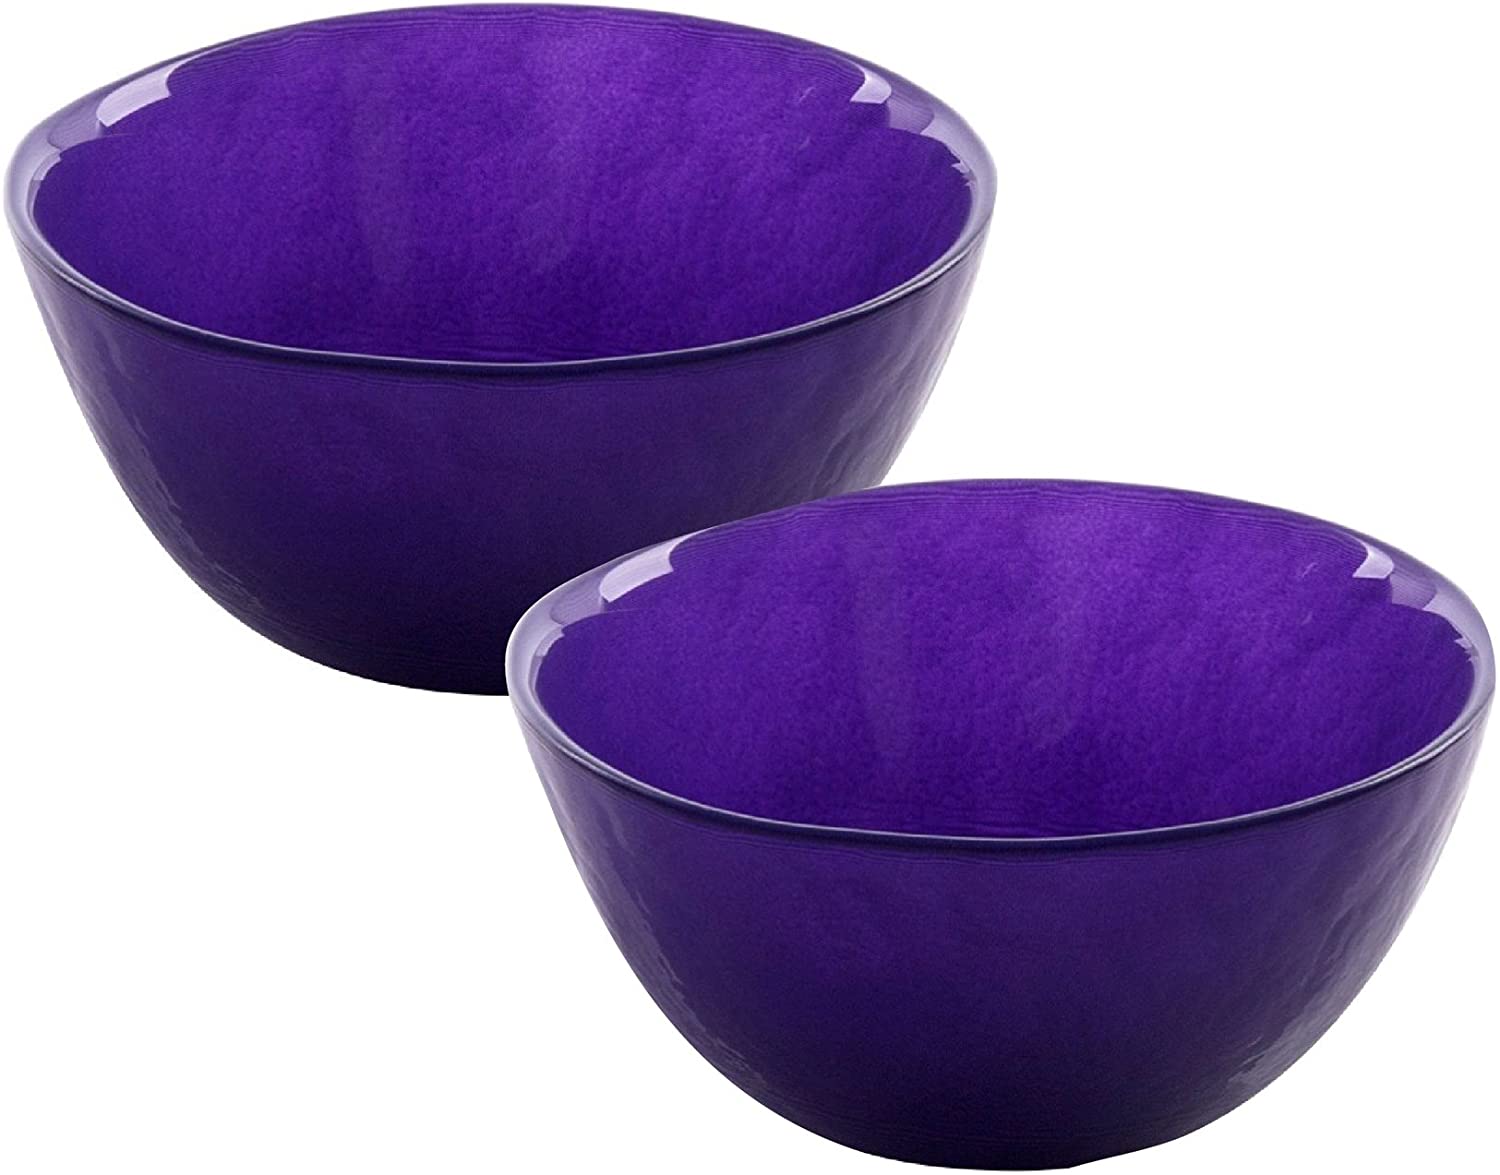 Bohemia Cristal Play of Colours 093 012 008 Set of 2 Approx. Diameter 145 mm Purple Made of Soda-Lime Glass Bowl 7.6 x 14.5 x 7.6 cm